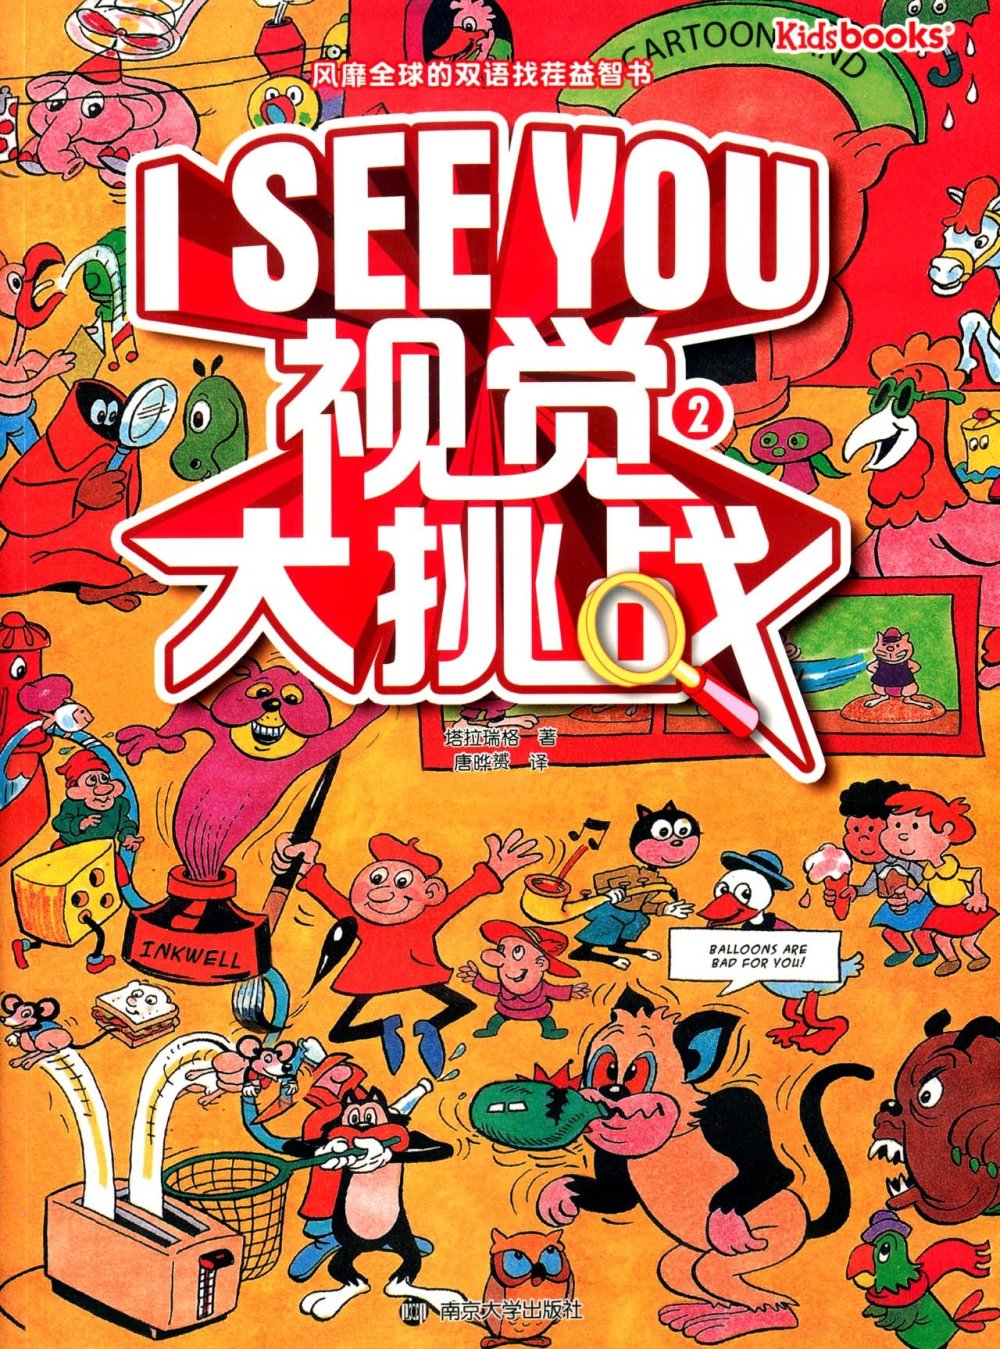 I See You:視覺大挑戰（2）